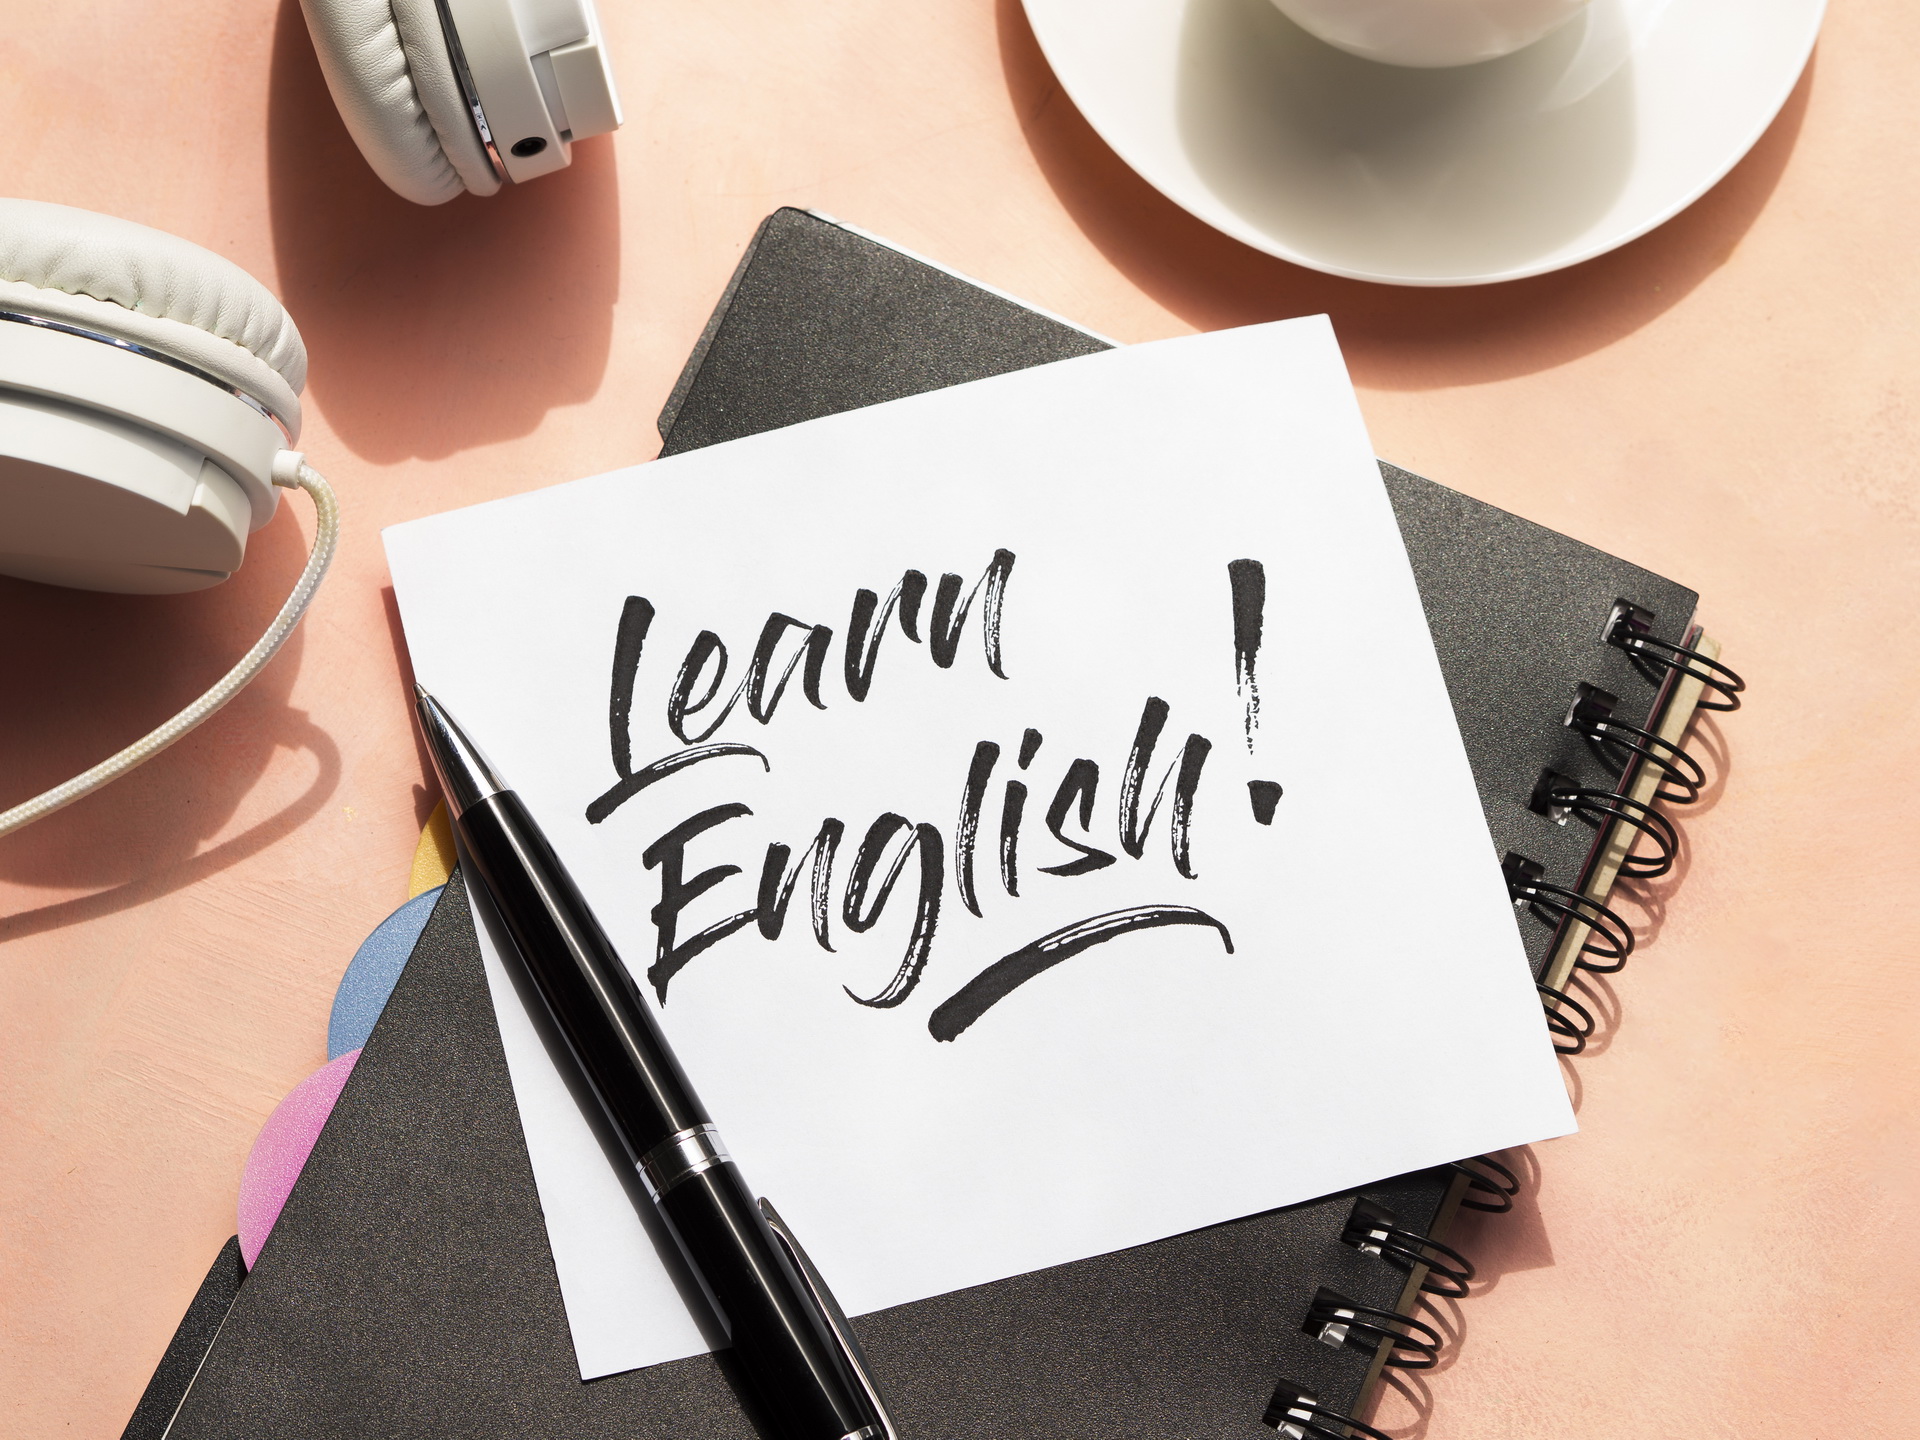 English language courses for Advanced learners